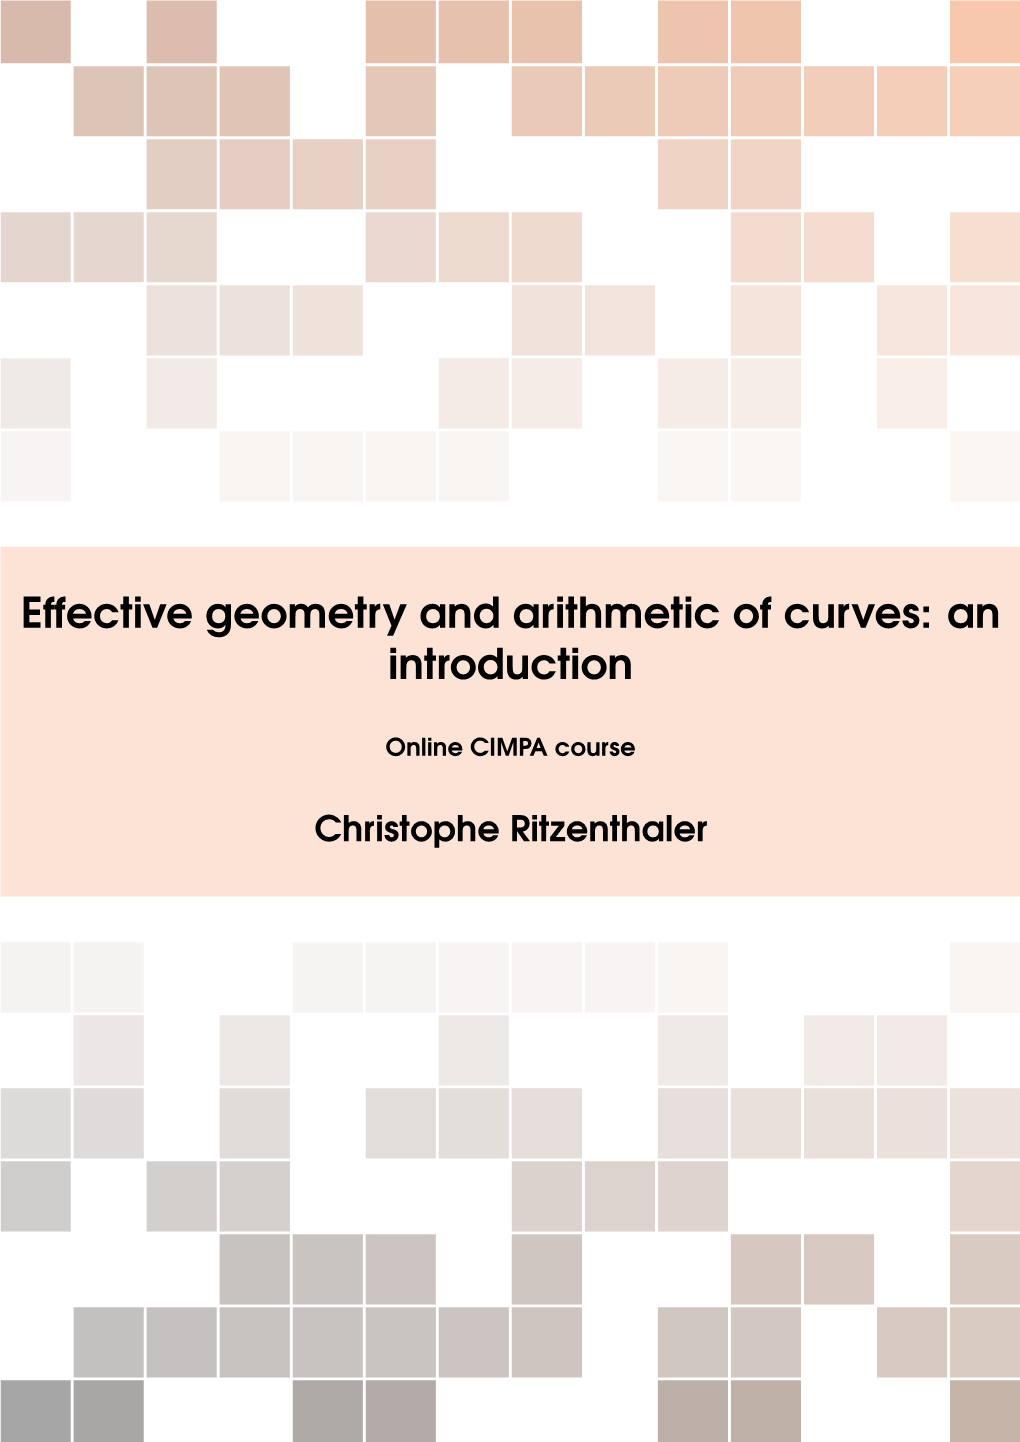 Effective Geometry and Arithmetic of Curves: an Introduction